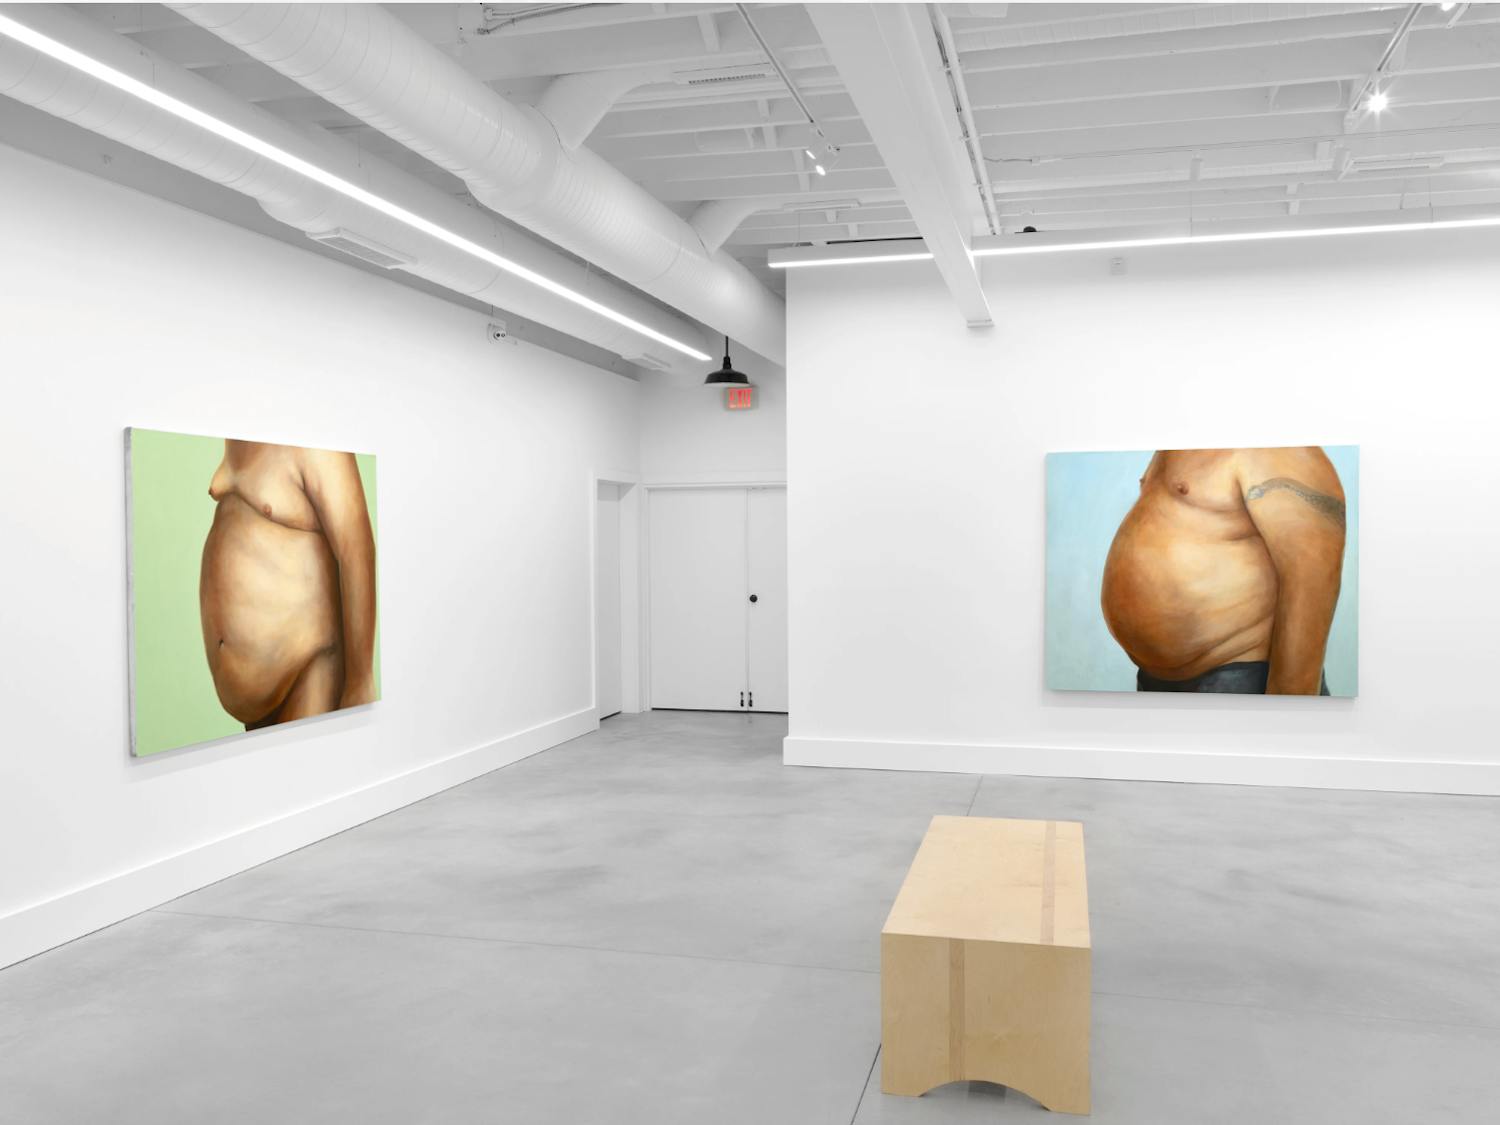 Joann Linder's latest exhibition explores the reversal of the male gaze | Images courtesy of the artist and Rivalry Projects, Buffalo, NY&nbsp;